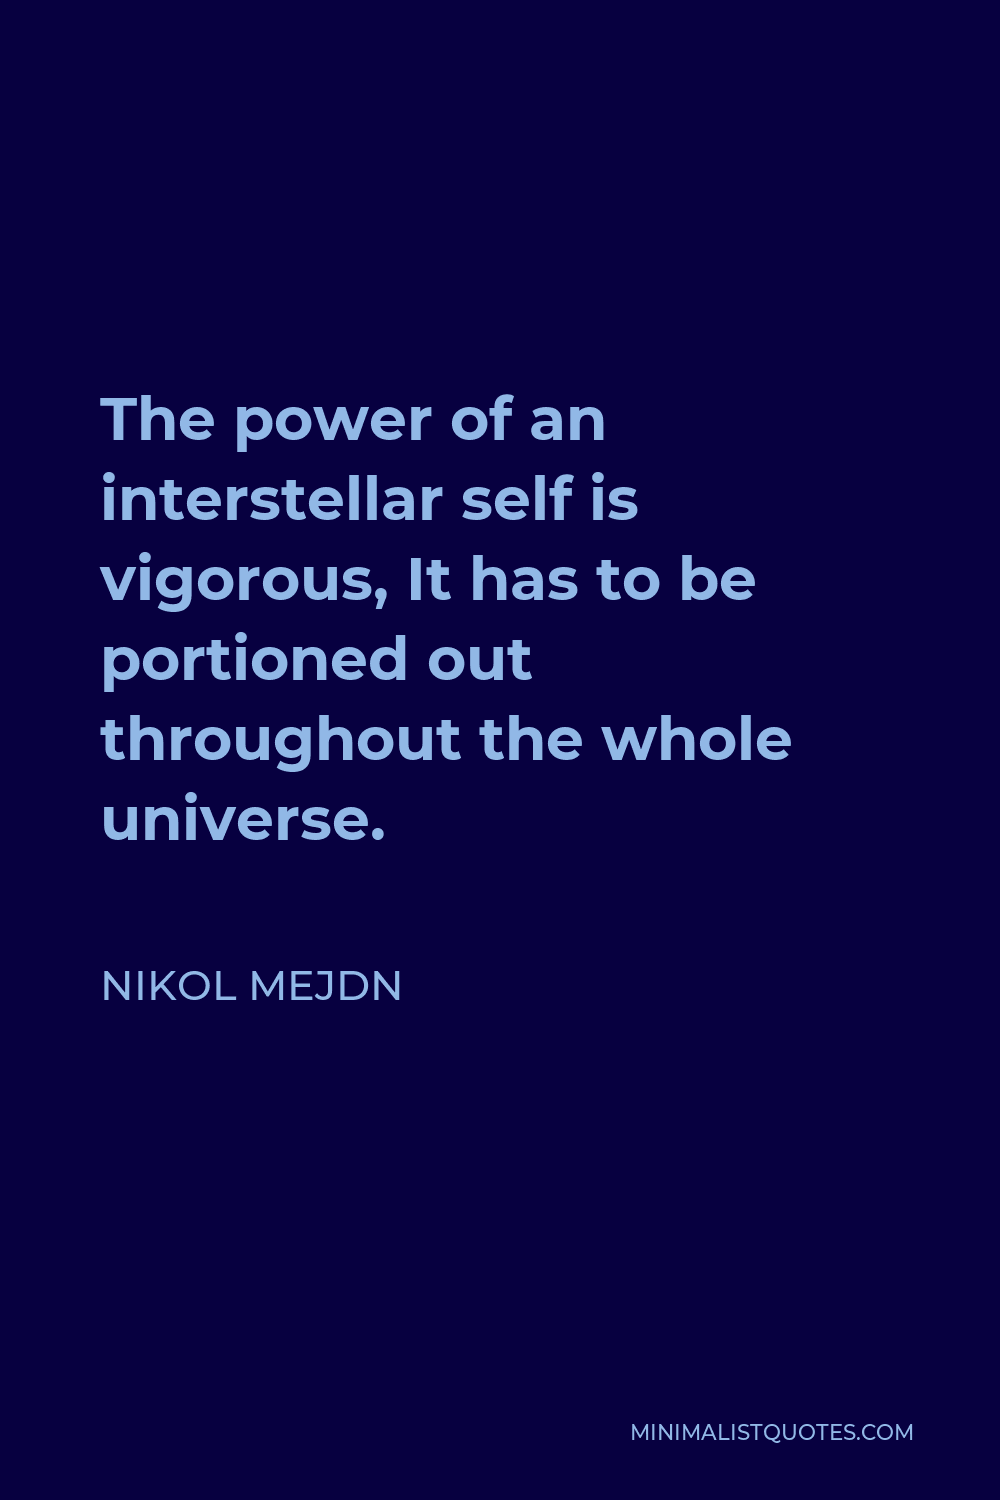 Nikol Mejdn Quote - The power of an interstellar self is vigorous, It has to be portioned out throughout the whole universe.